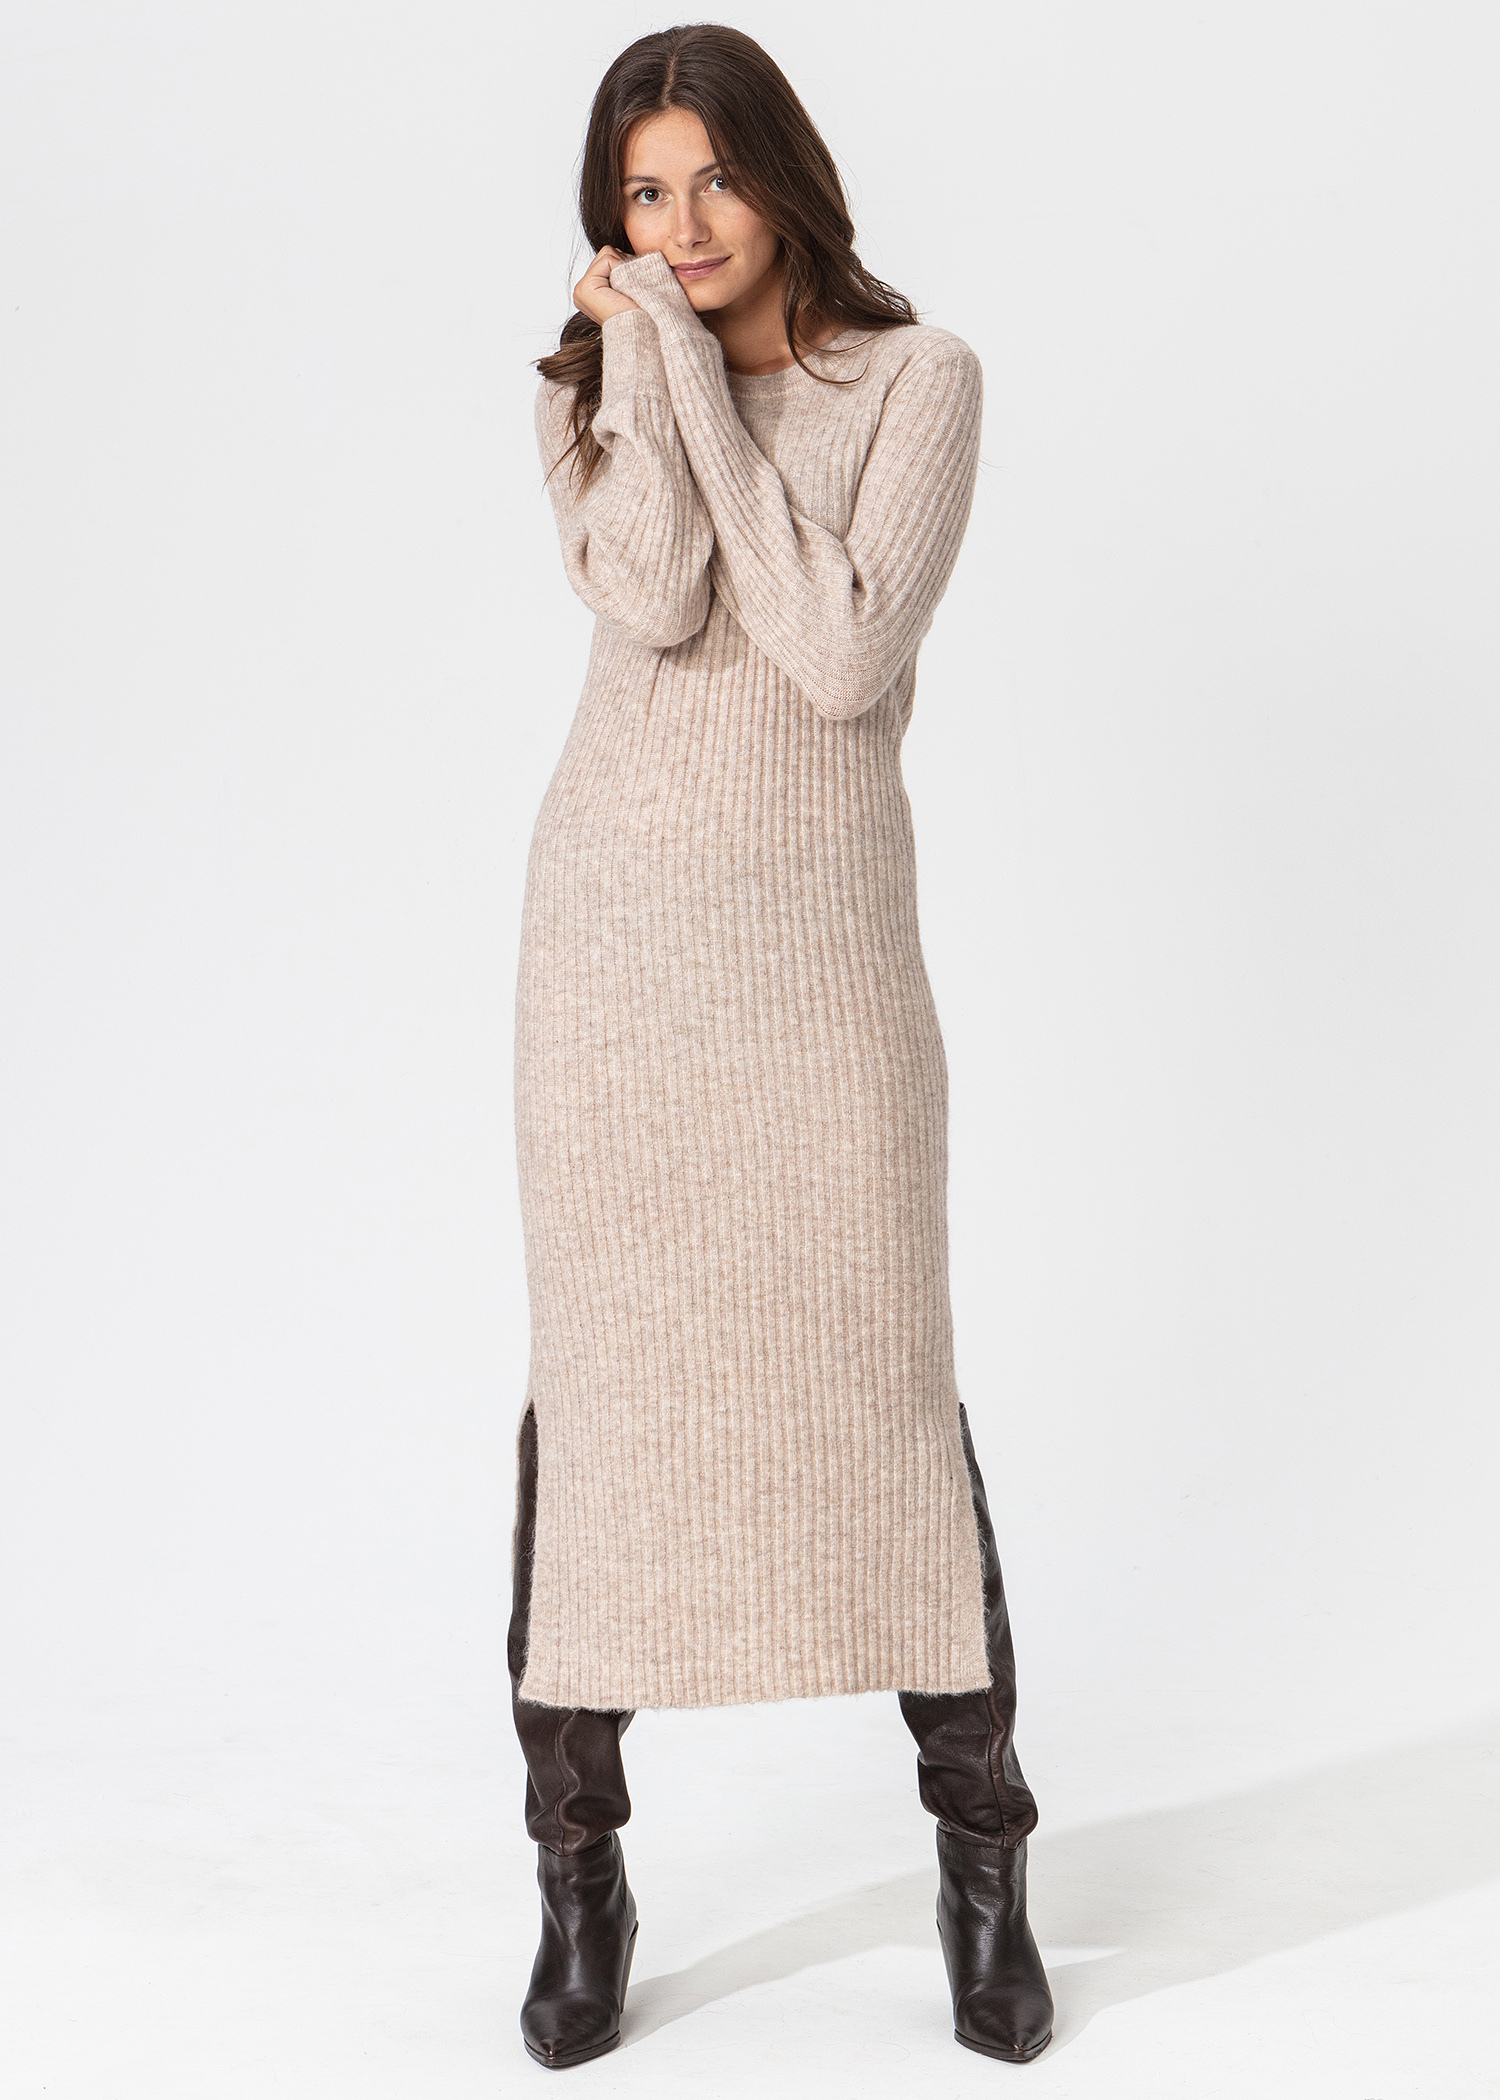 Beige knitted dress Image 0